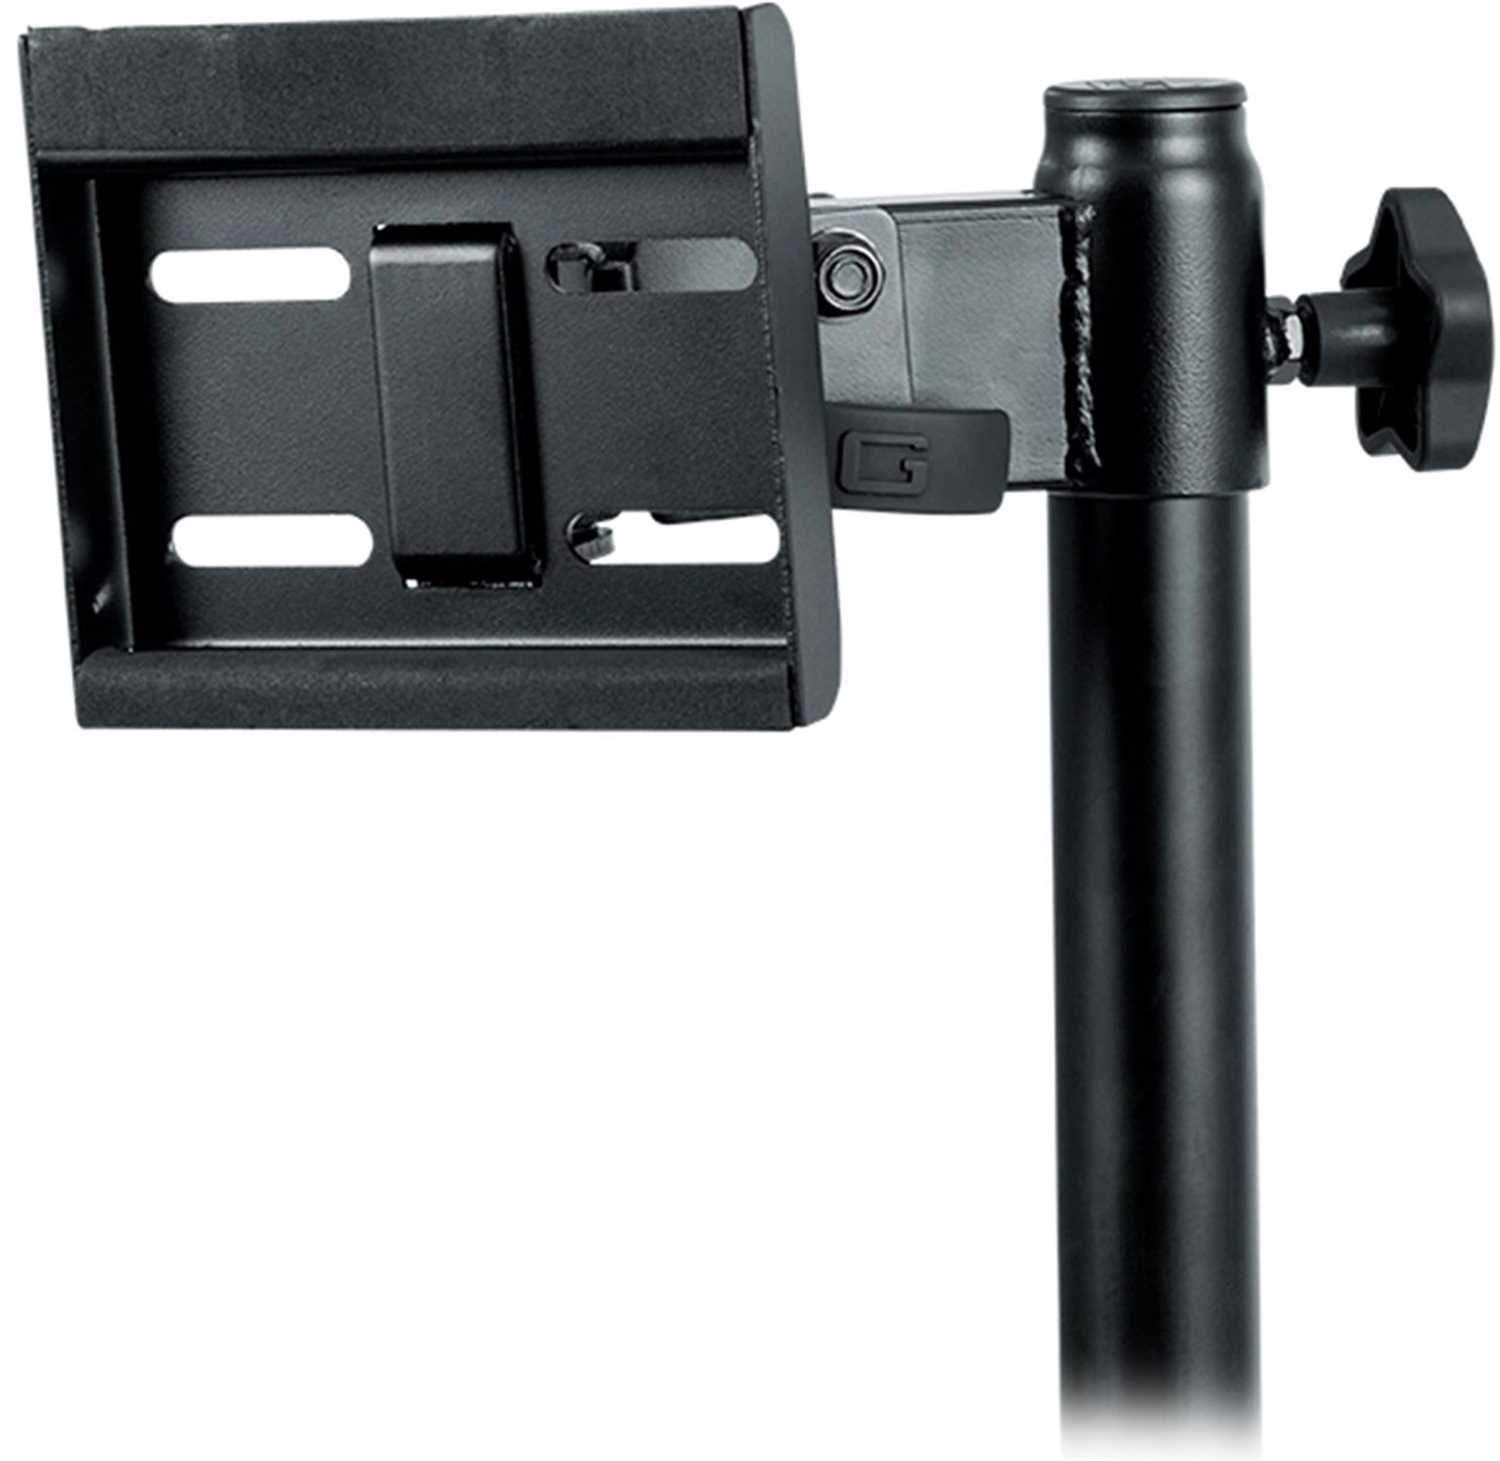 Gator Frameworks LCD Video Monitor Tripod Stand with White Scrim - ProSound and Stage Lighting